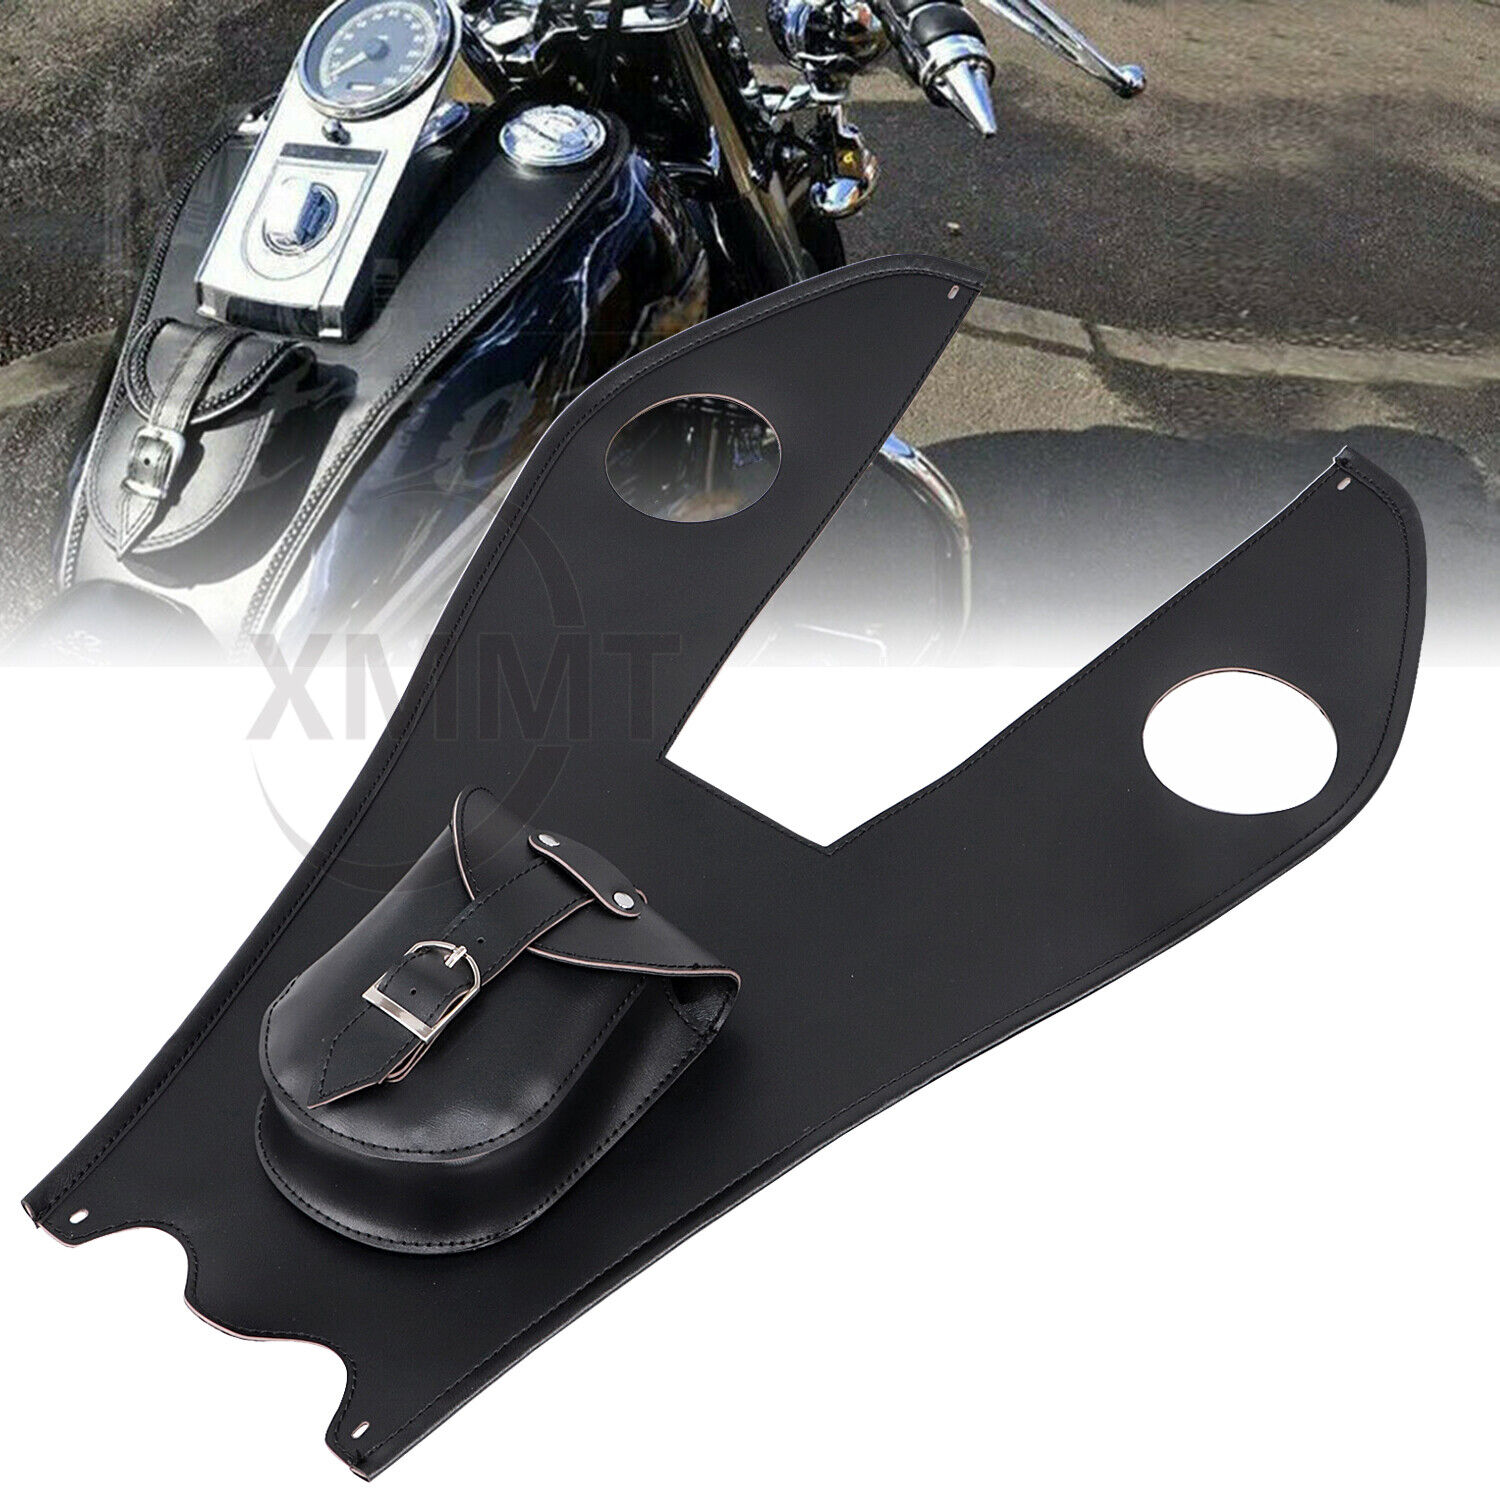 Leather Gas Tank Bag Cover Pad W/Pouch for Harley Heritage Softail Classic  FLSTC